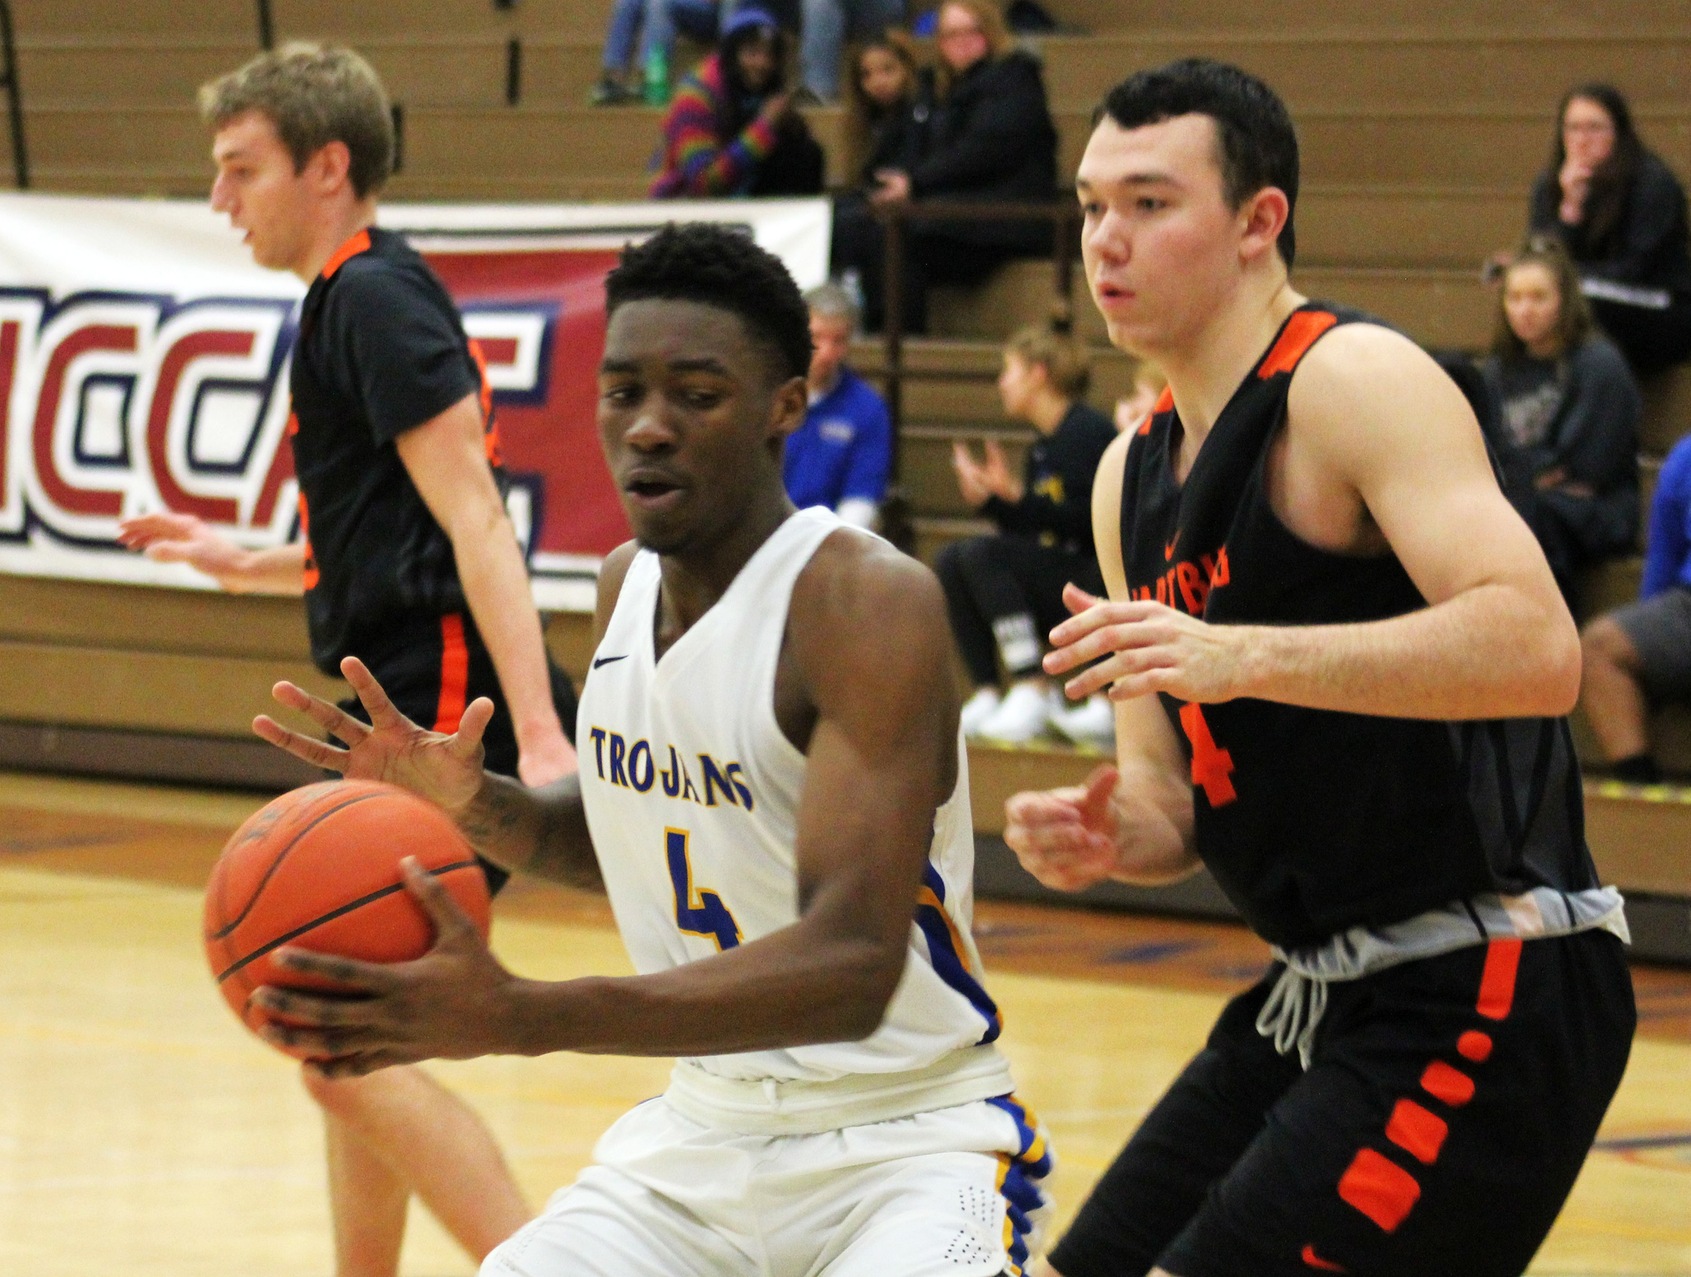 NIACC's Wendell Matthews looks to make a move in the post in Sunday's win over the Wartburg College JV.